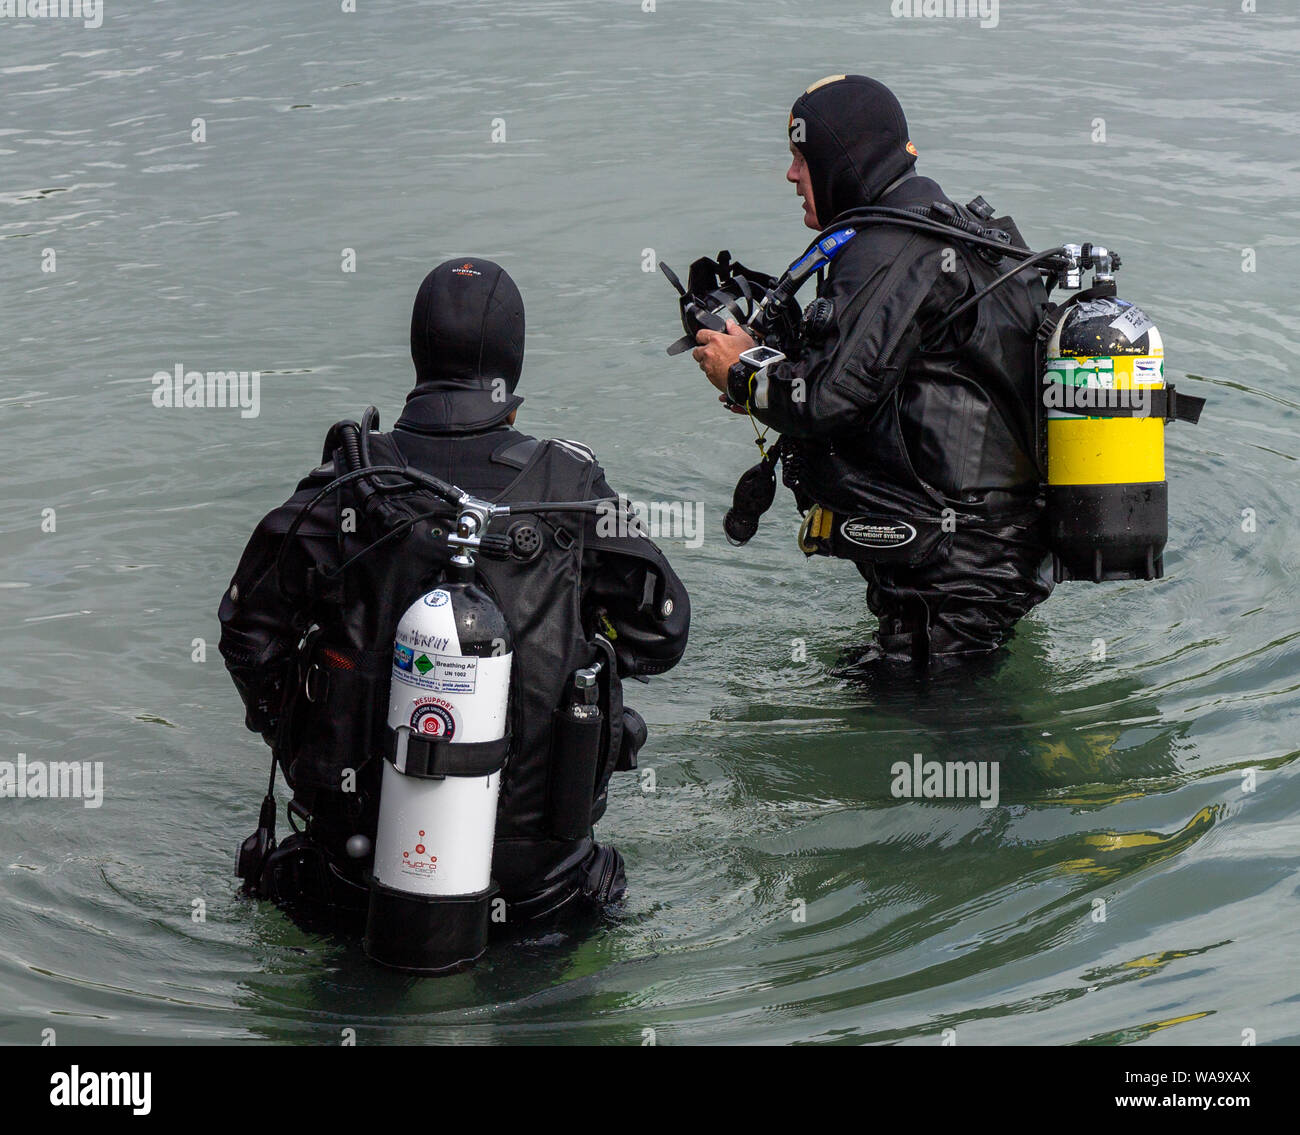 Scuba divers or sub aqua divers standing in the water Stock Photo